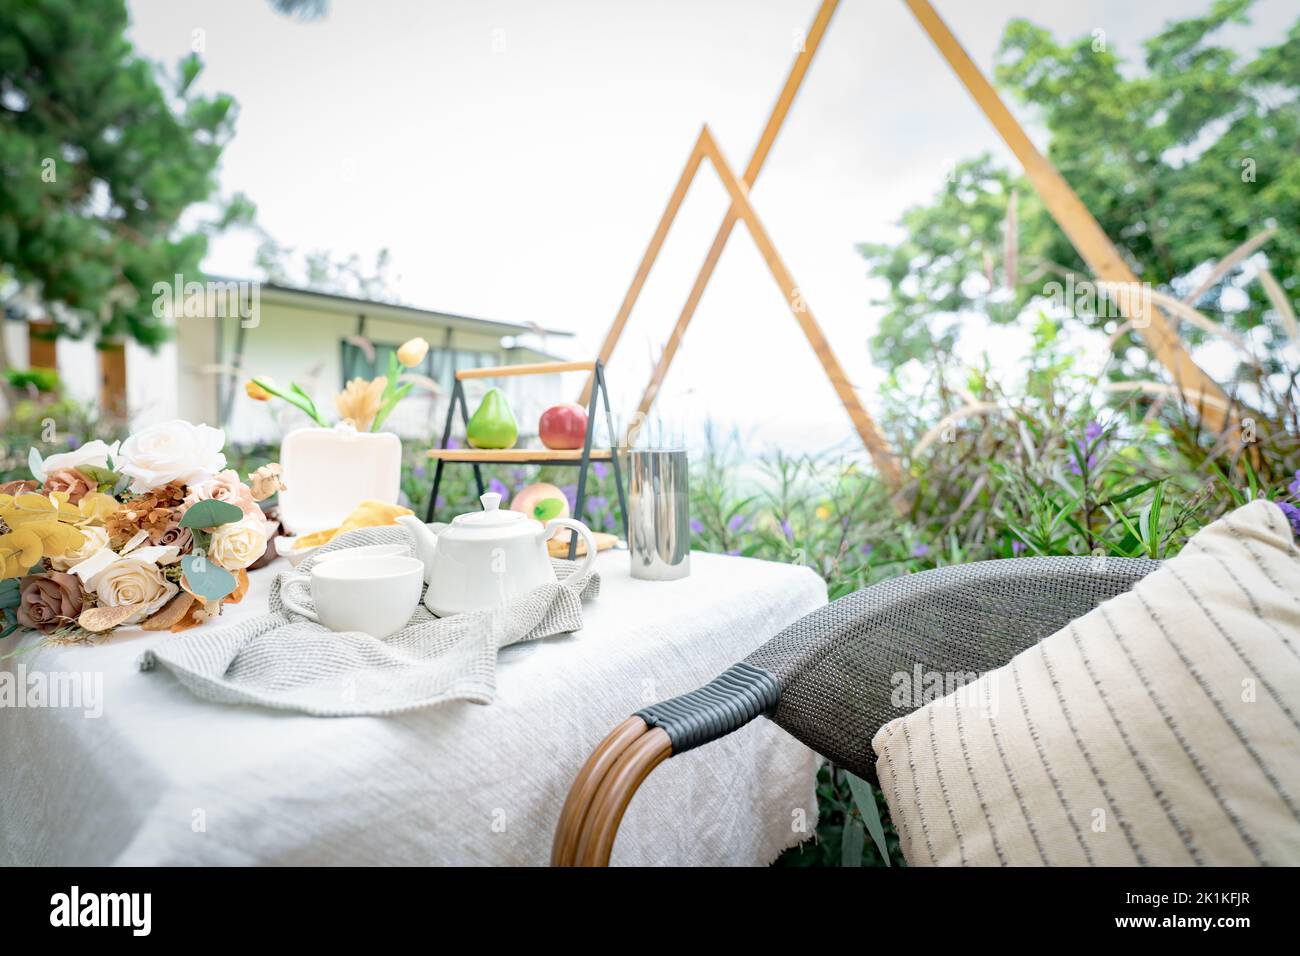 Coffee cup and flowers bouquet on table in garden. Afternoon tea concept. Home outdoor furniture. Wicker chair and table with white tablecloth Stock Photo